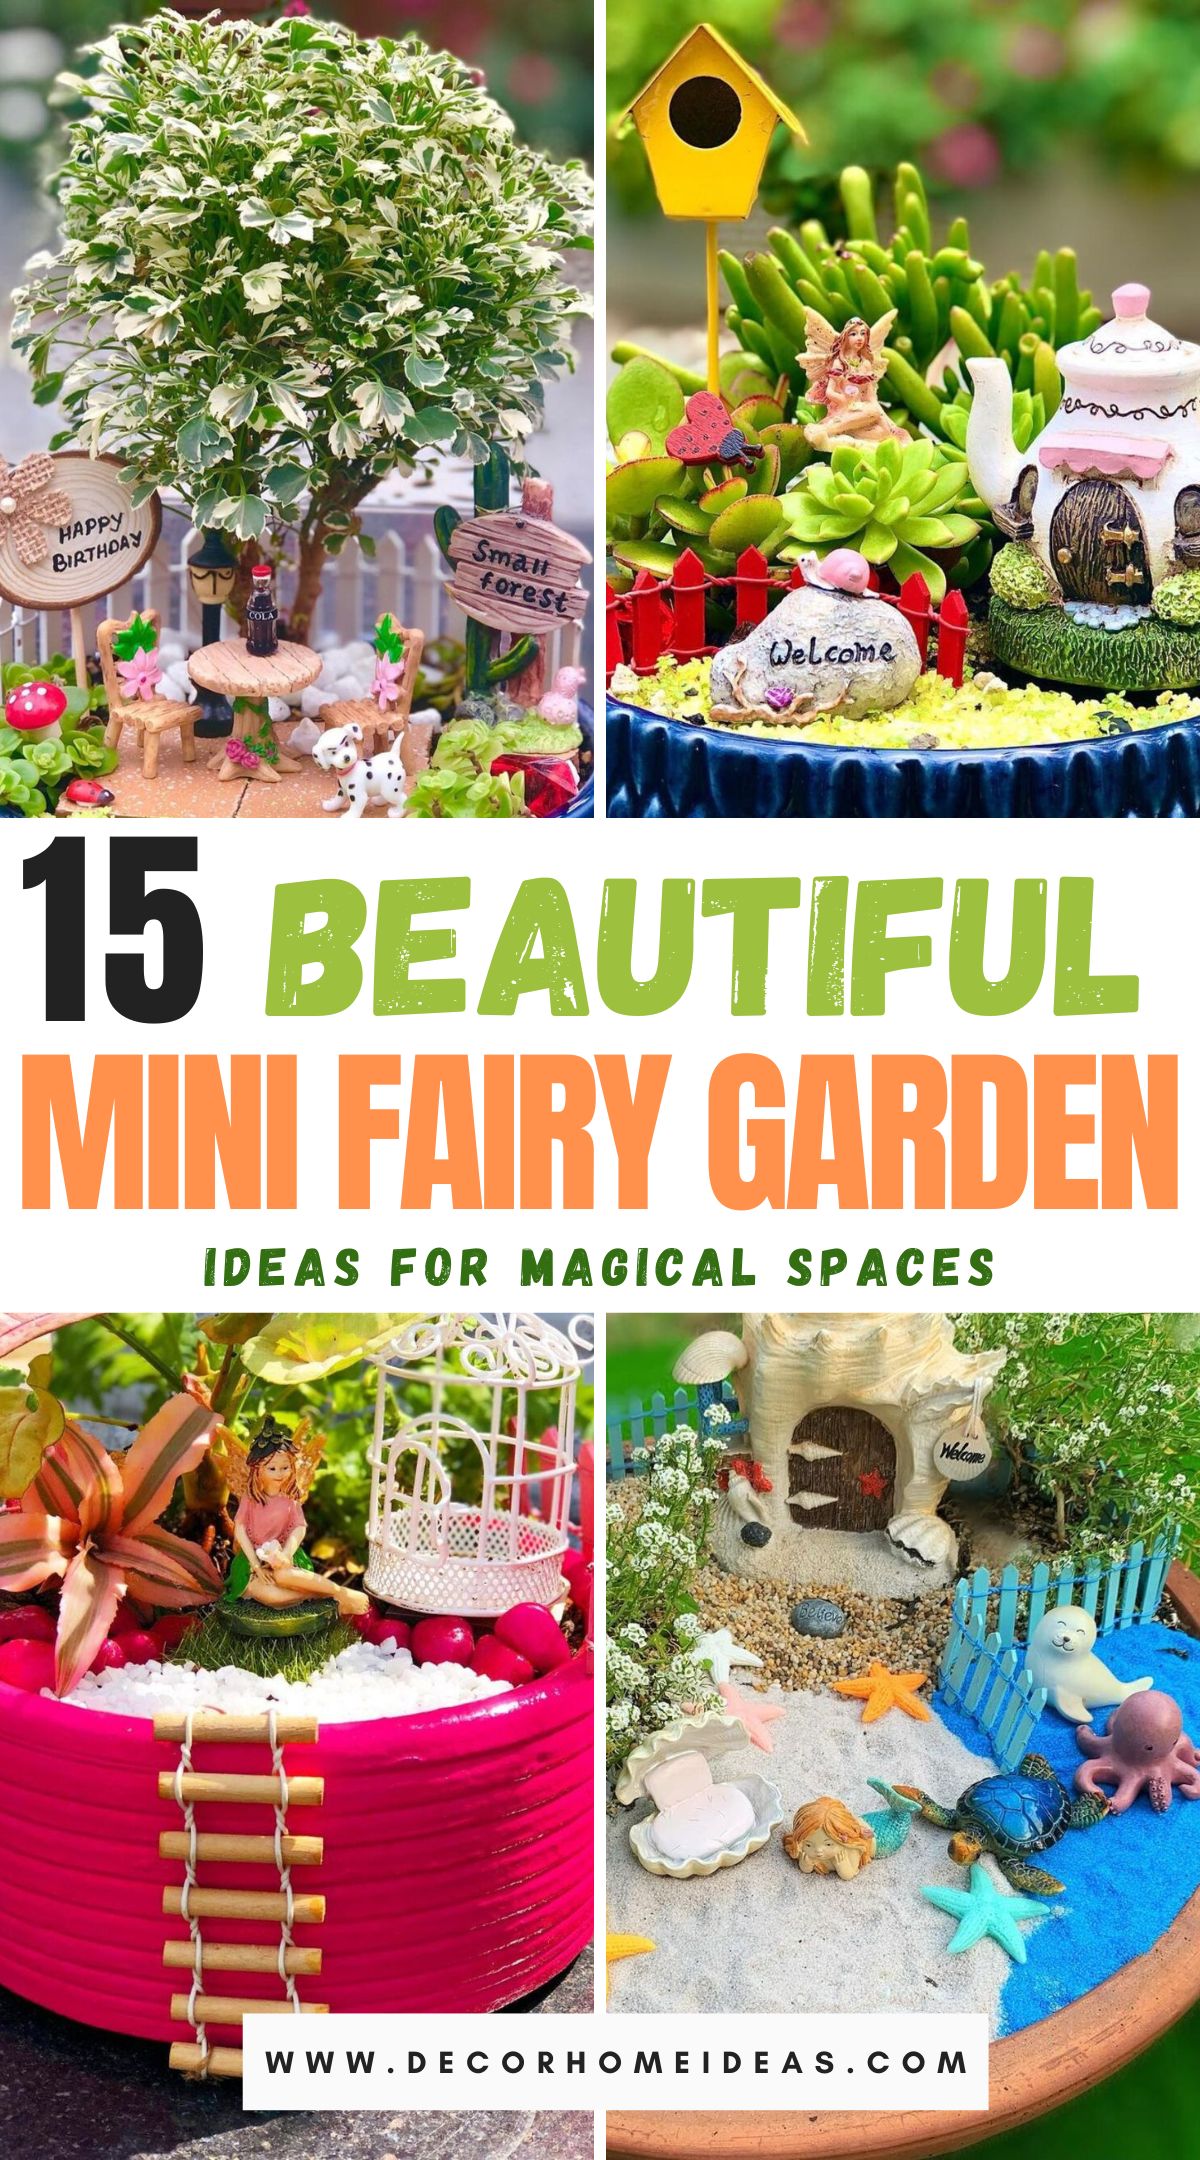 Spark your imagination with these 15 enchanting mini fairy garden ideas. From whimsical landscapes to charming vignettes, discover creative designs that invite a touch of magic into your outdoor space, cultivating a sense of wonder and delight.